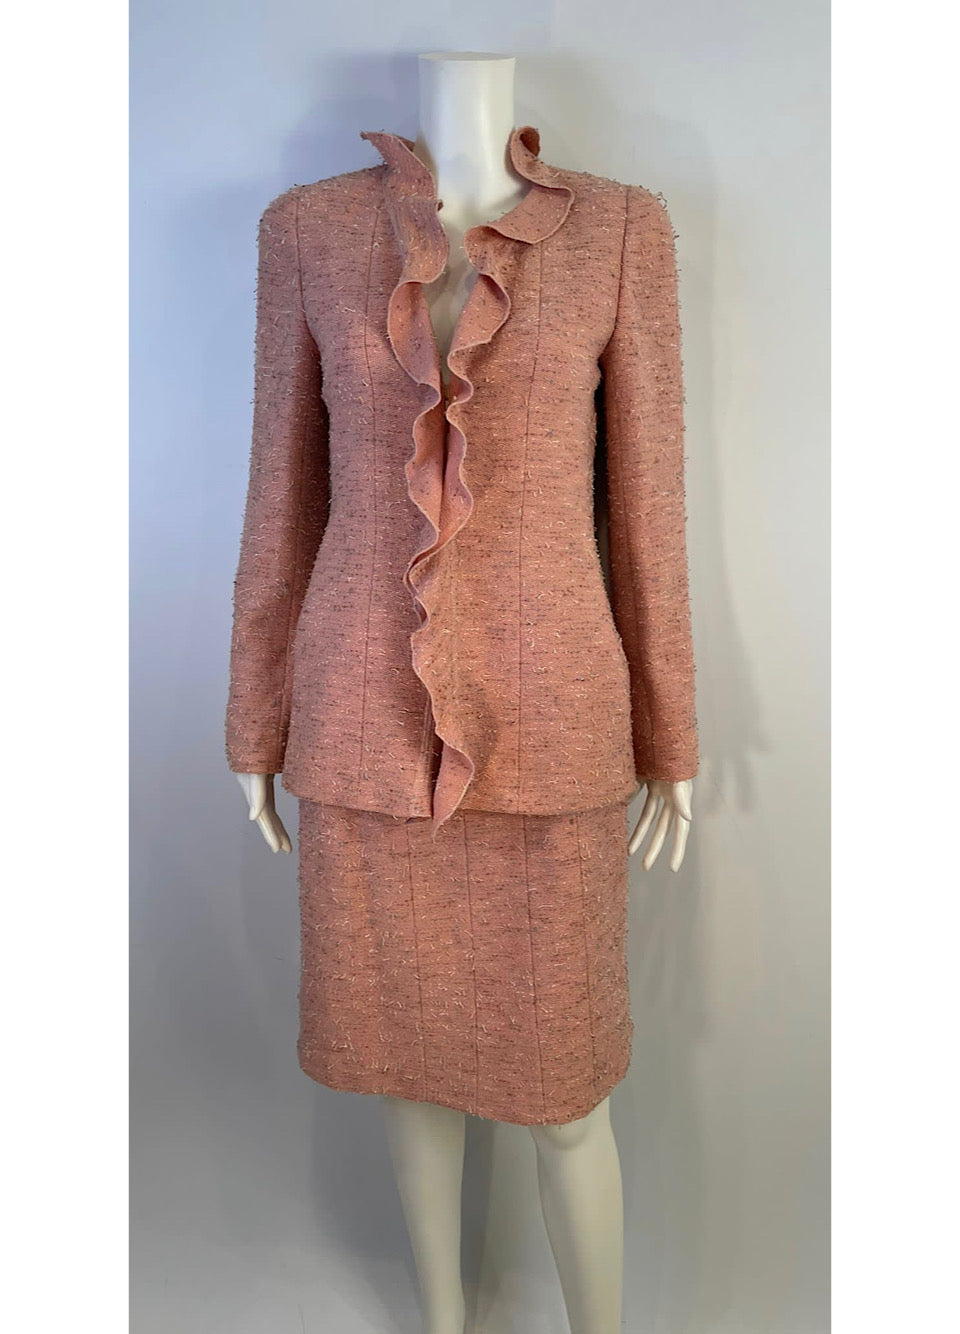 HelensChanel Vintage Chanel 99a 1999 Fall Pink Skirt Suit US 6/8